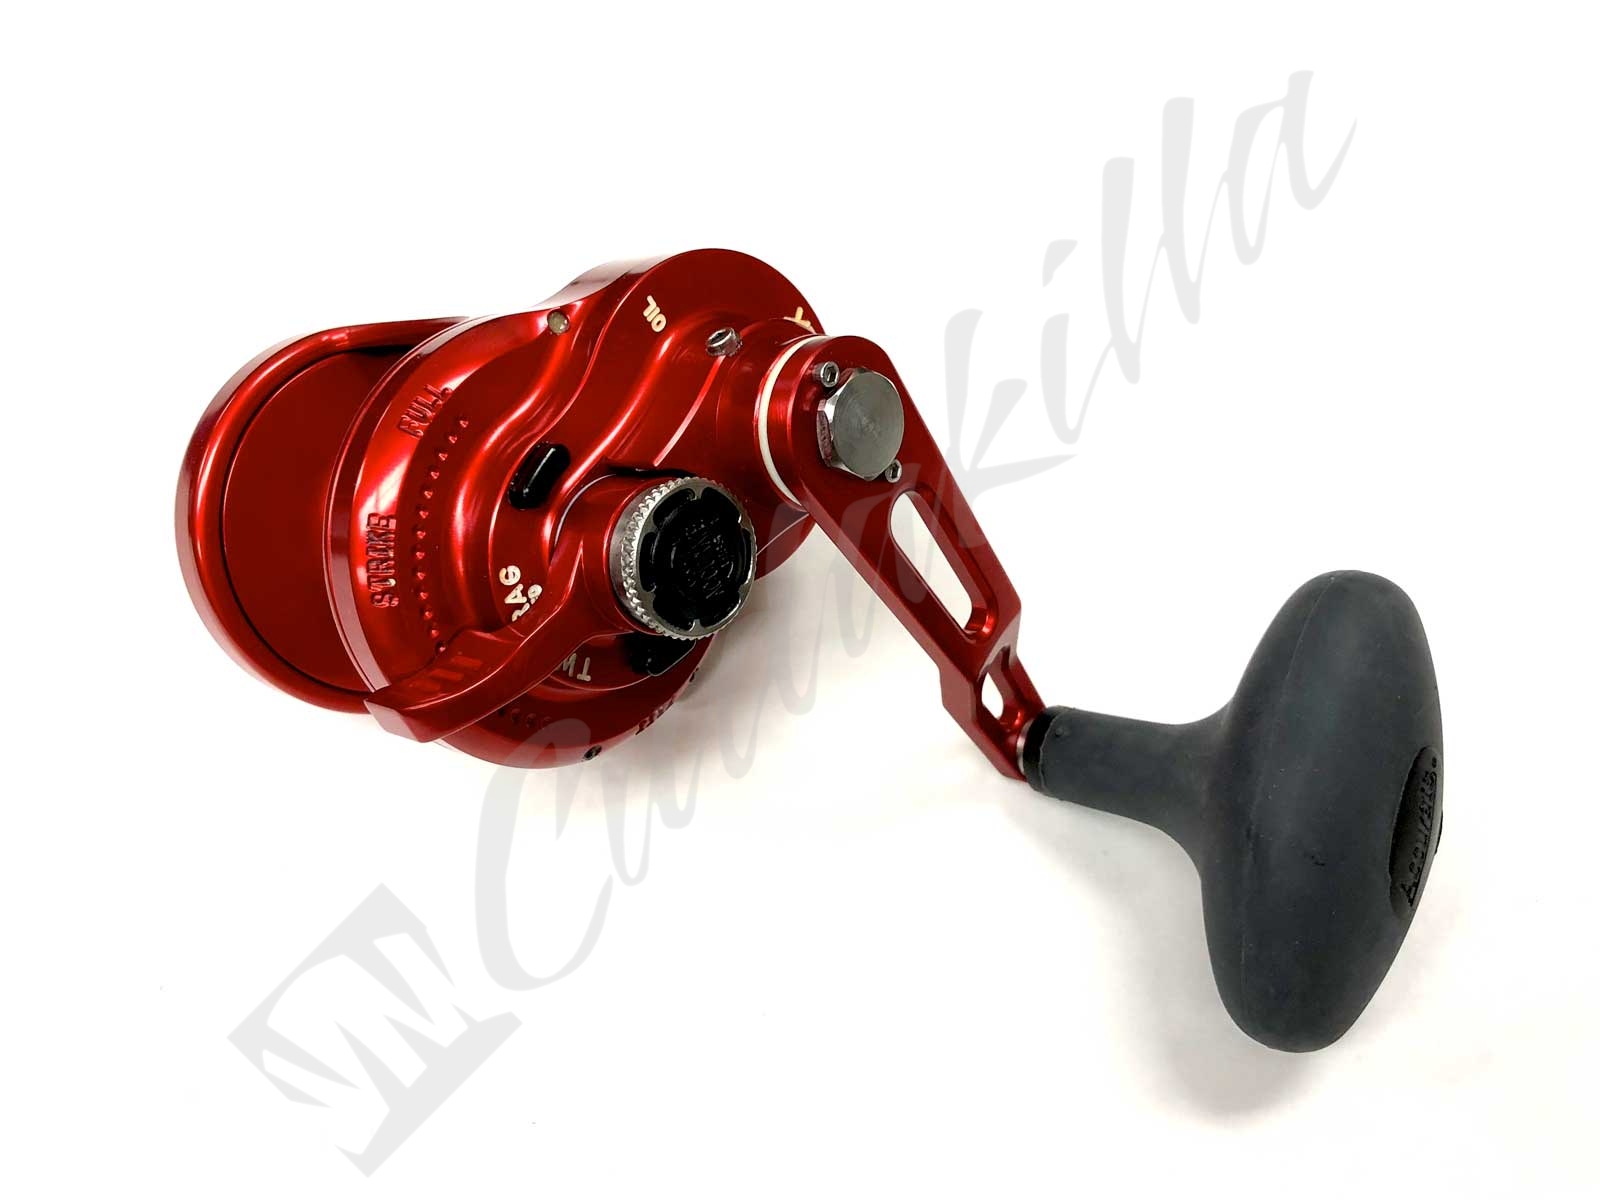 Accurate BX Boss Extreme Left Hand Reels - TackleDirect